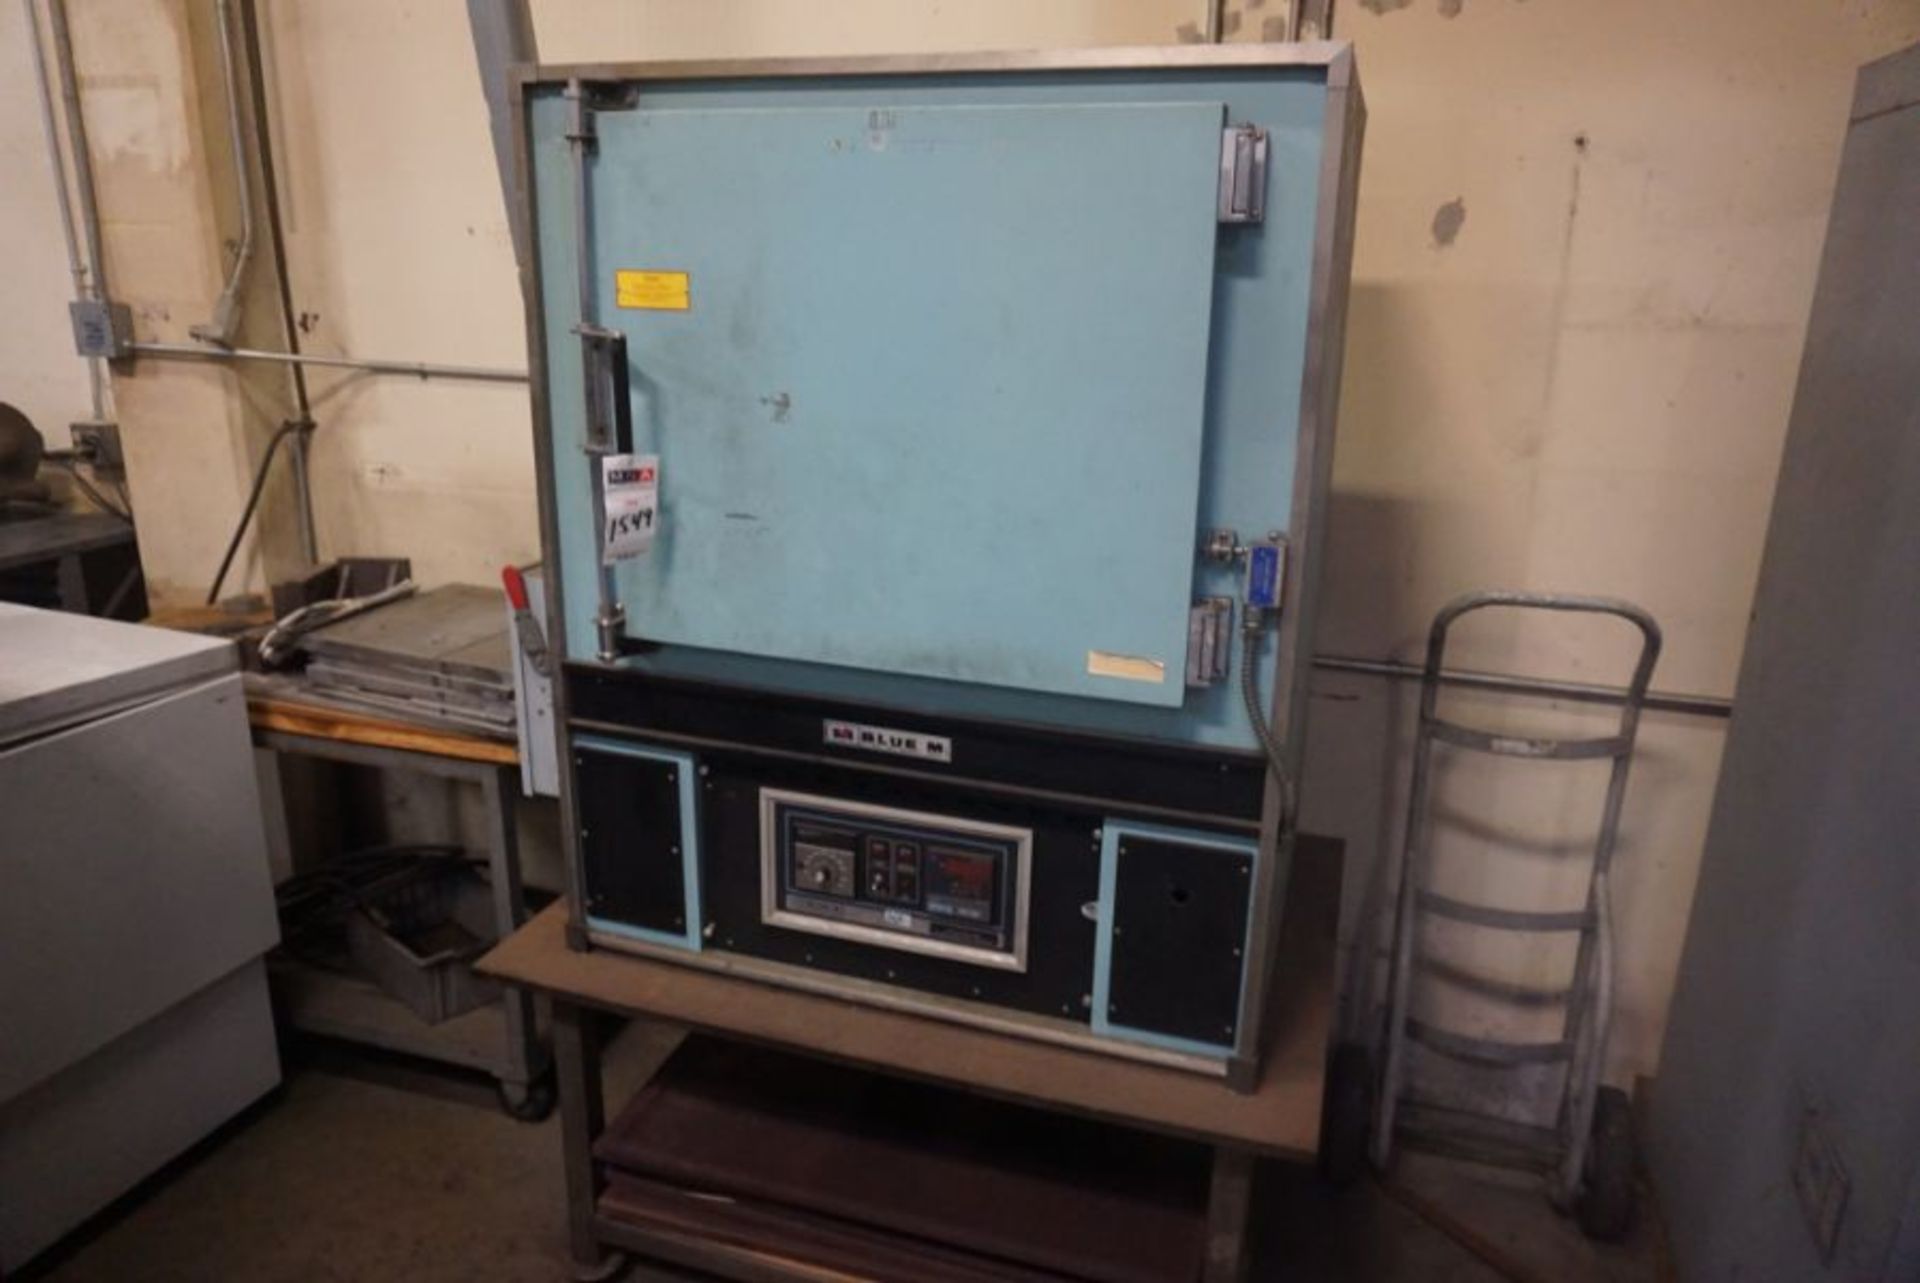 Blue M DC256C 650 Degree Max. Temp. Convection Oven, s/n DC3476 - Image 4 of 5